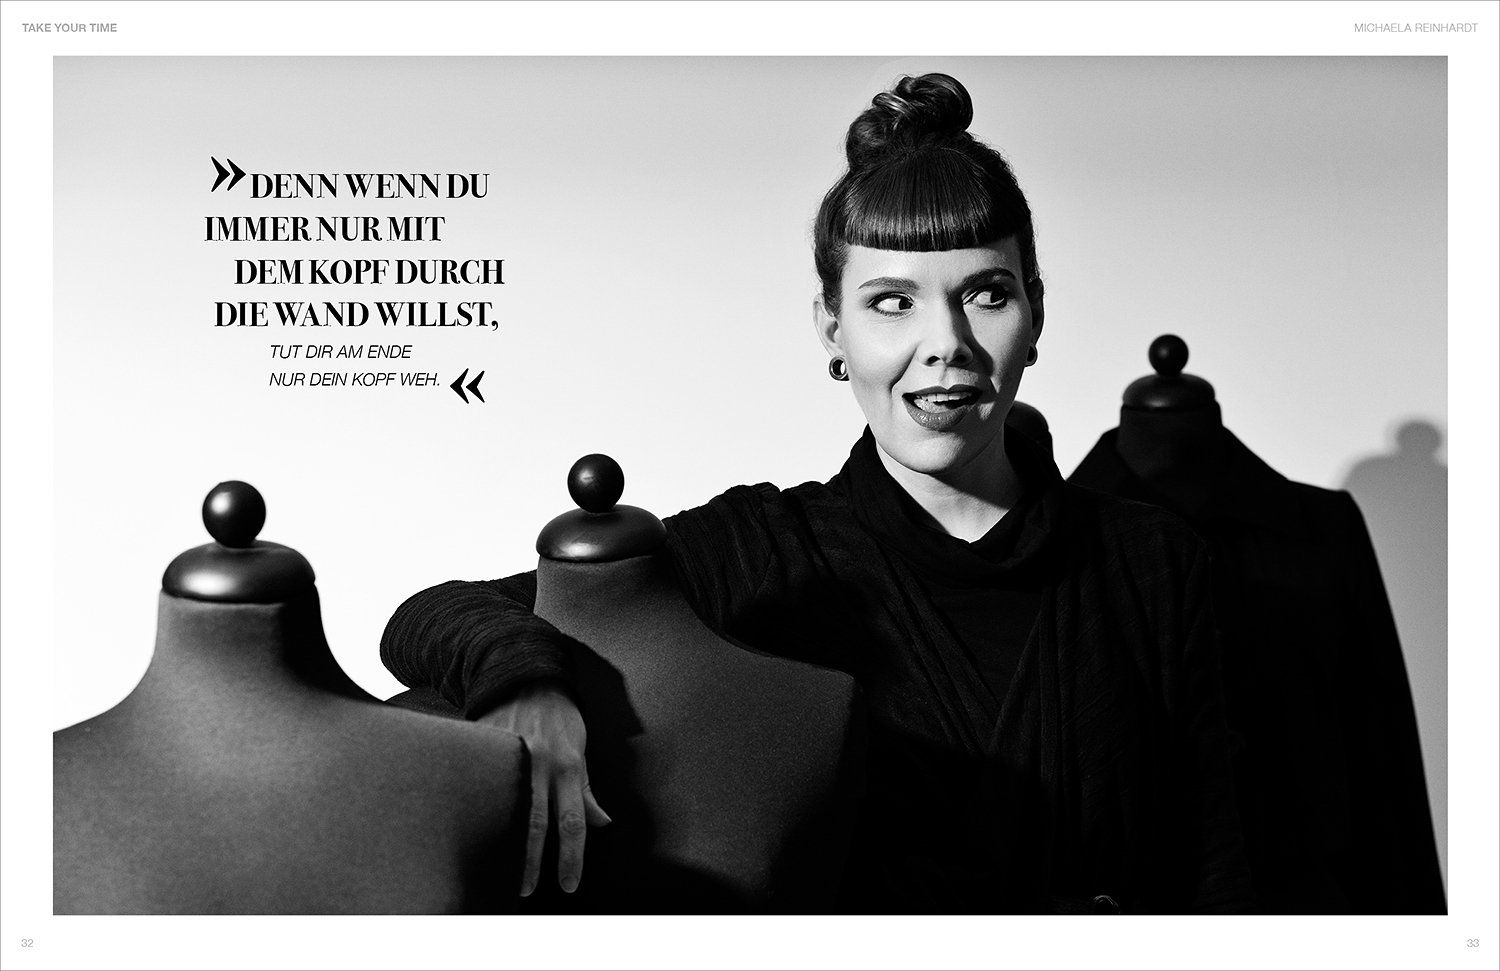 Take Your Time Michaela Reinhardt Portrait with quote by Cornelia Köster